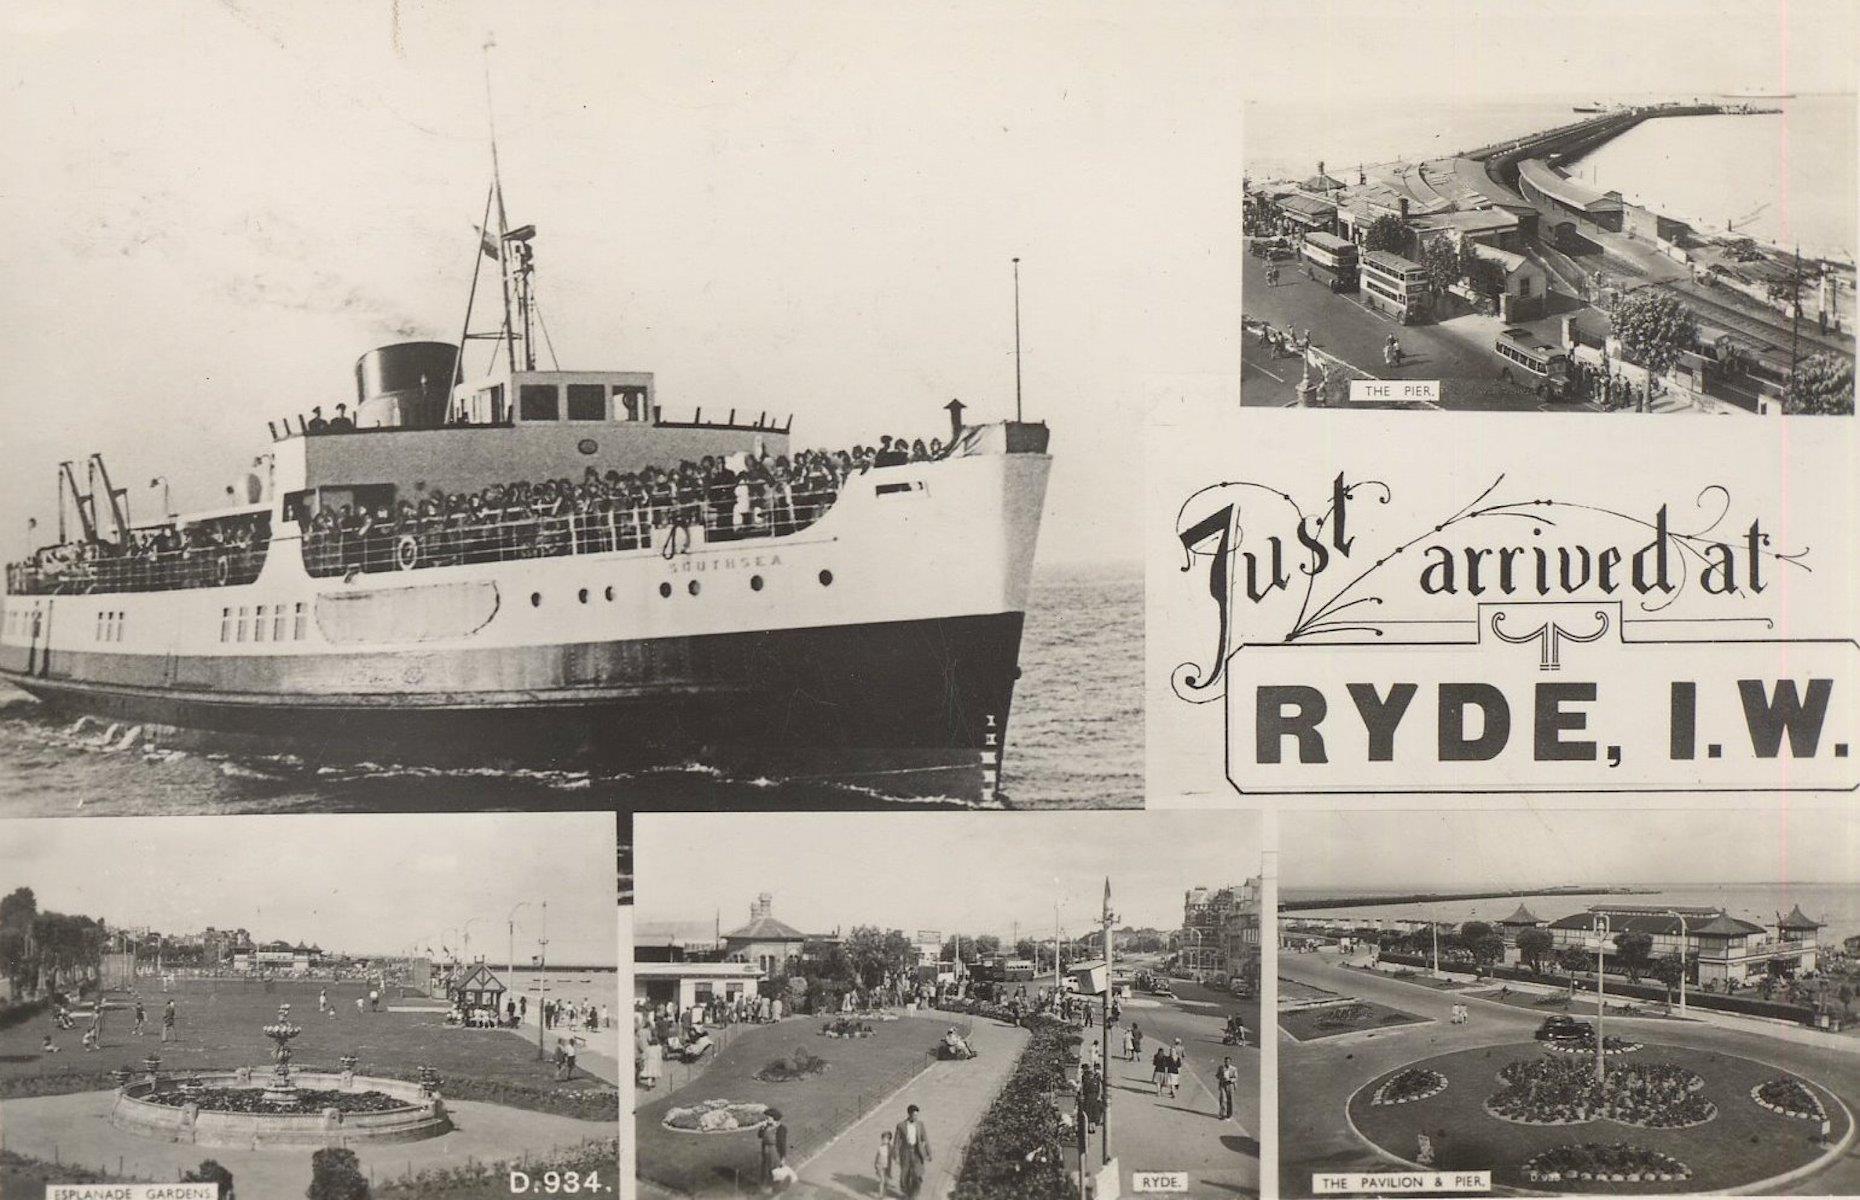 <p>Long time fan of British seaside nostalgia Glen Fairweather has built up an impressive database of old postcards, which he showcases on his <a href="https://www.flickr.com/photos/trainsandstuff/albums/">Flickr pages</a>. “I used to collect mostly old British postcards for nostalgic reasons – it reminded me of family vacations and growing up in England during the 1970s and 1980s when the whole vacation scene was so different to what it is now,” he says.</p>